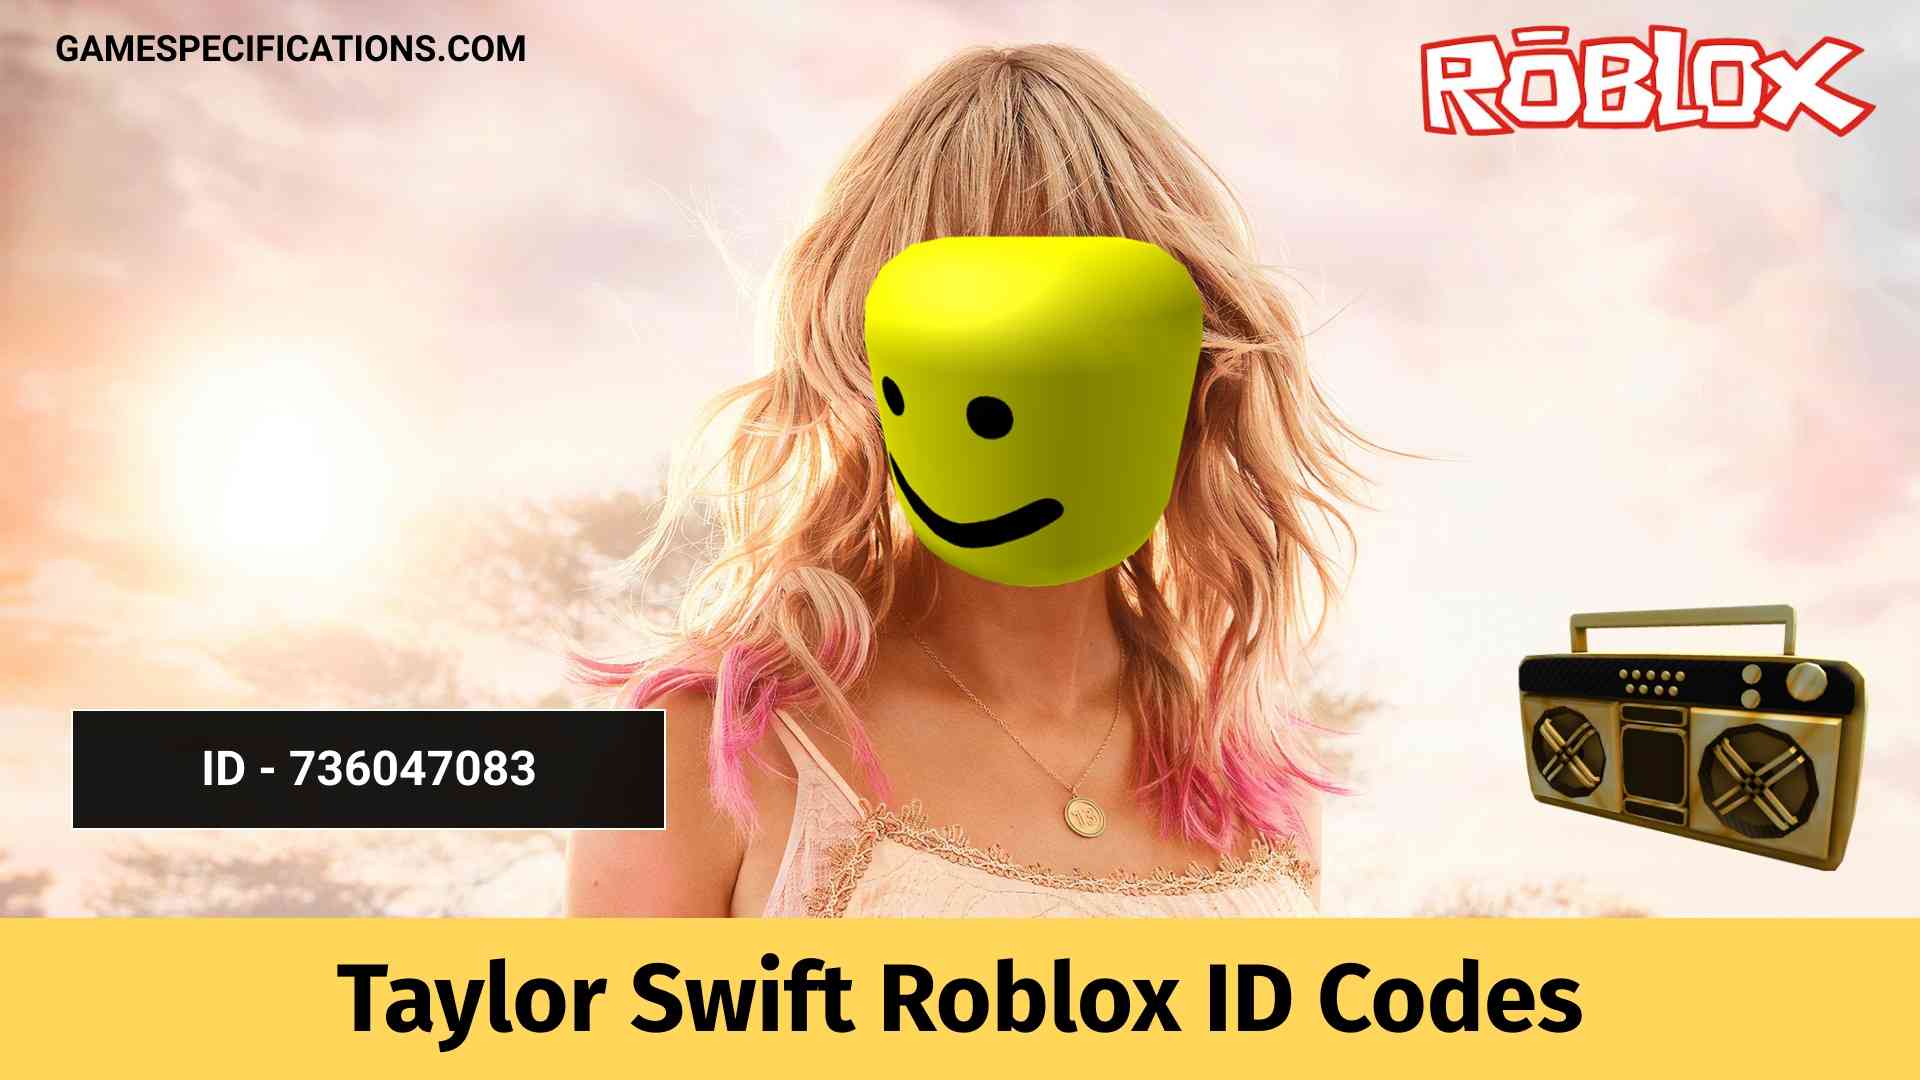 Taylor Swift Roblox Id Codes To Play Pop Songs 2021 Game Specifications - roblox id pictures bloxburg